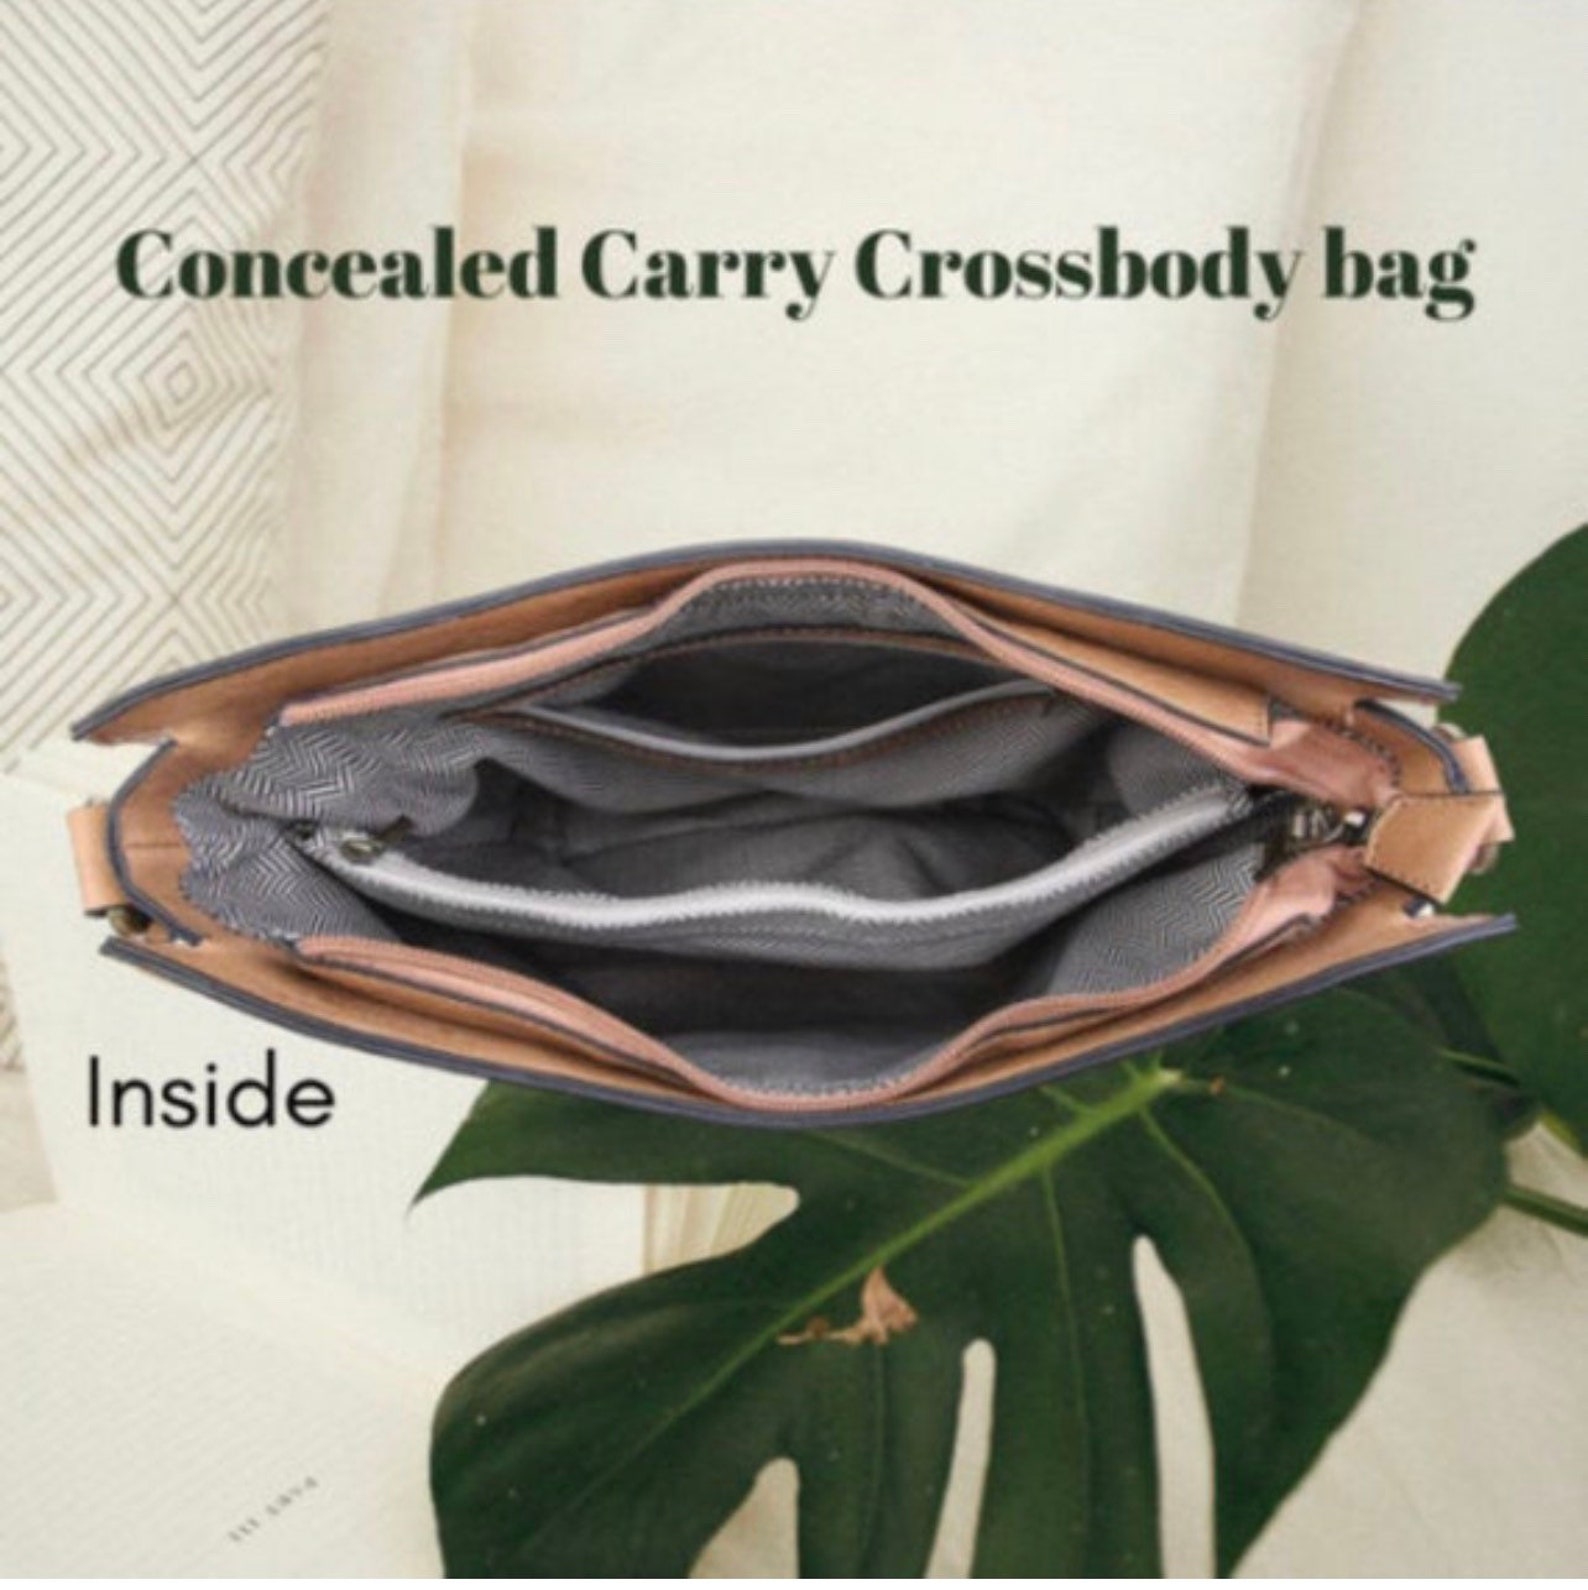 Concealed Carry Bag Monogrammed Crossbody Bag Personalized - Etsy